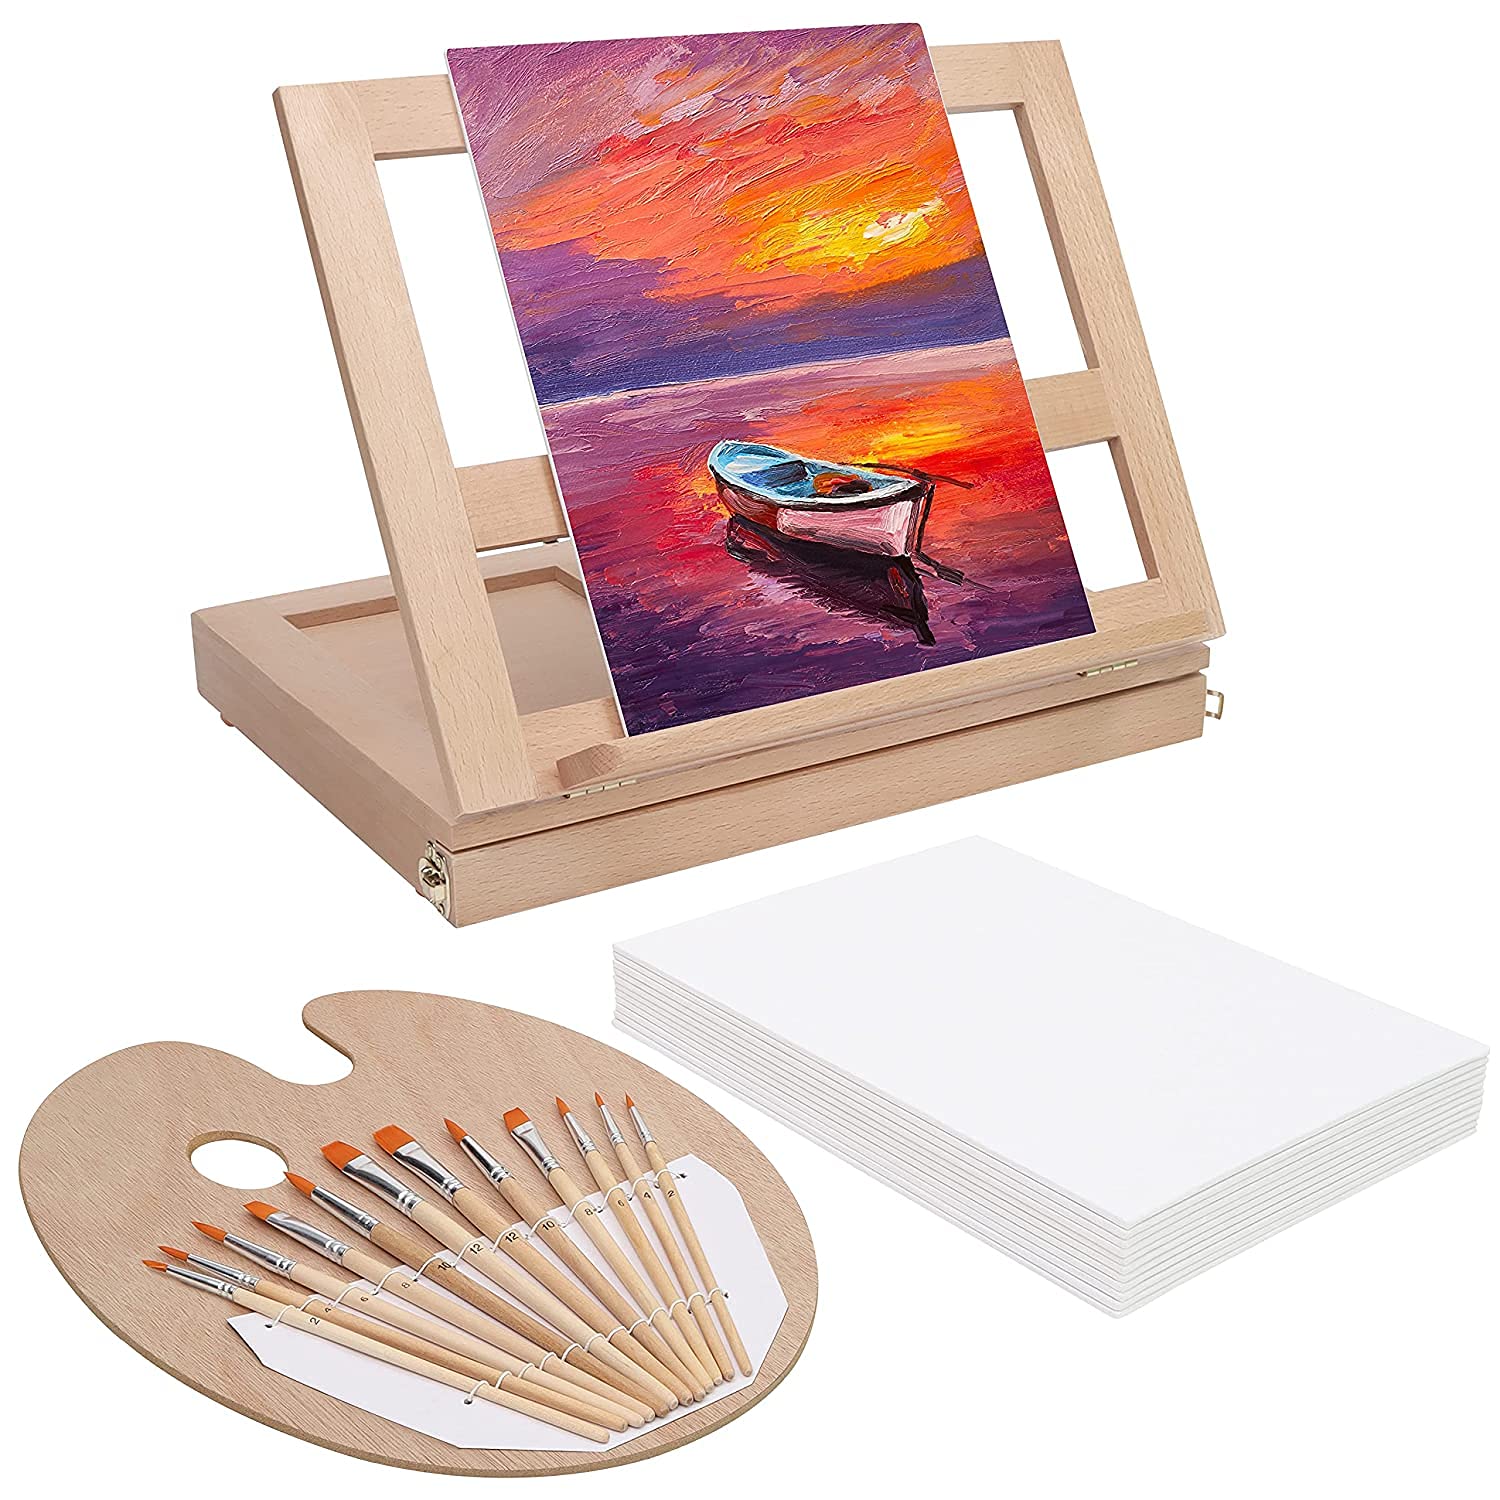 Tabletop Wooden Easel Collapsible Display Stand Canvas Holder for Artists  Kids Adults Art Paintings DIY Crafts Photos